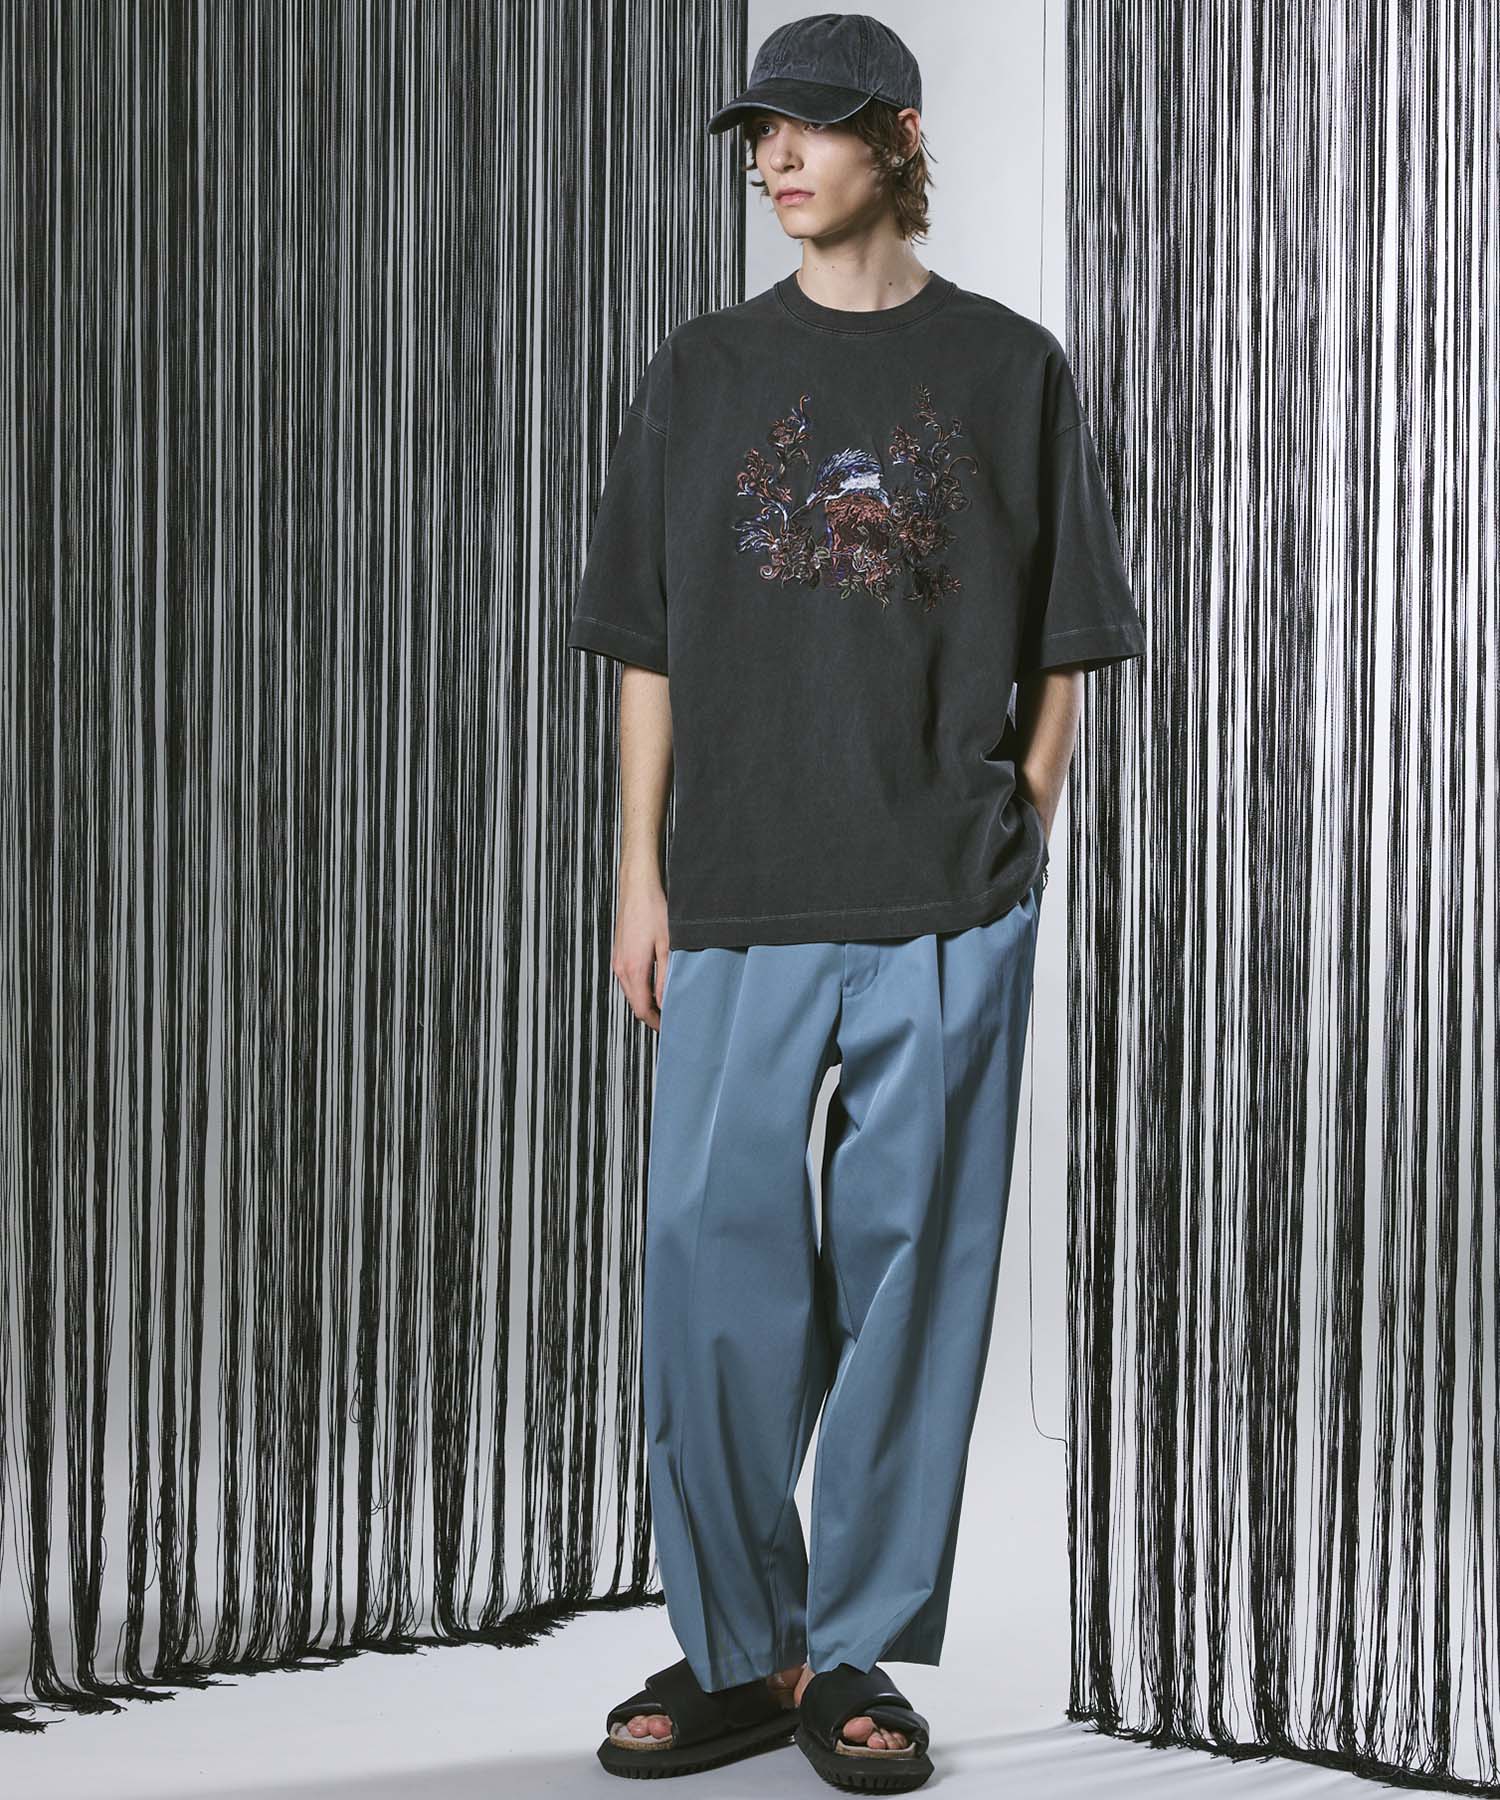 「FLOWER BIRD」Embroidery Chemical Over-Dye Prime-Over Crew Neck T-Shirt